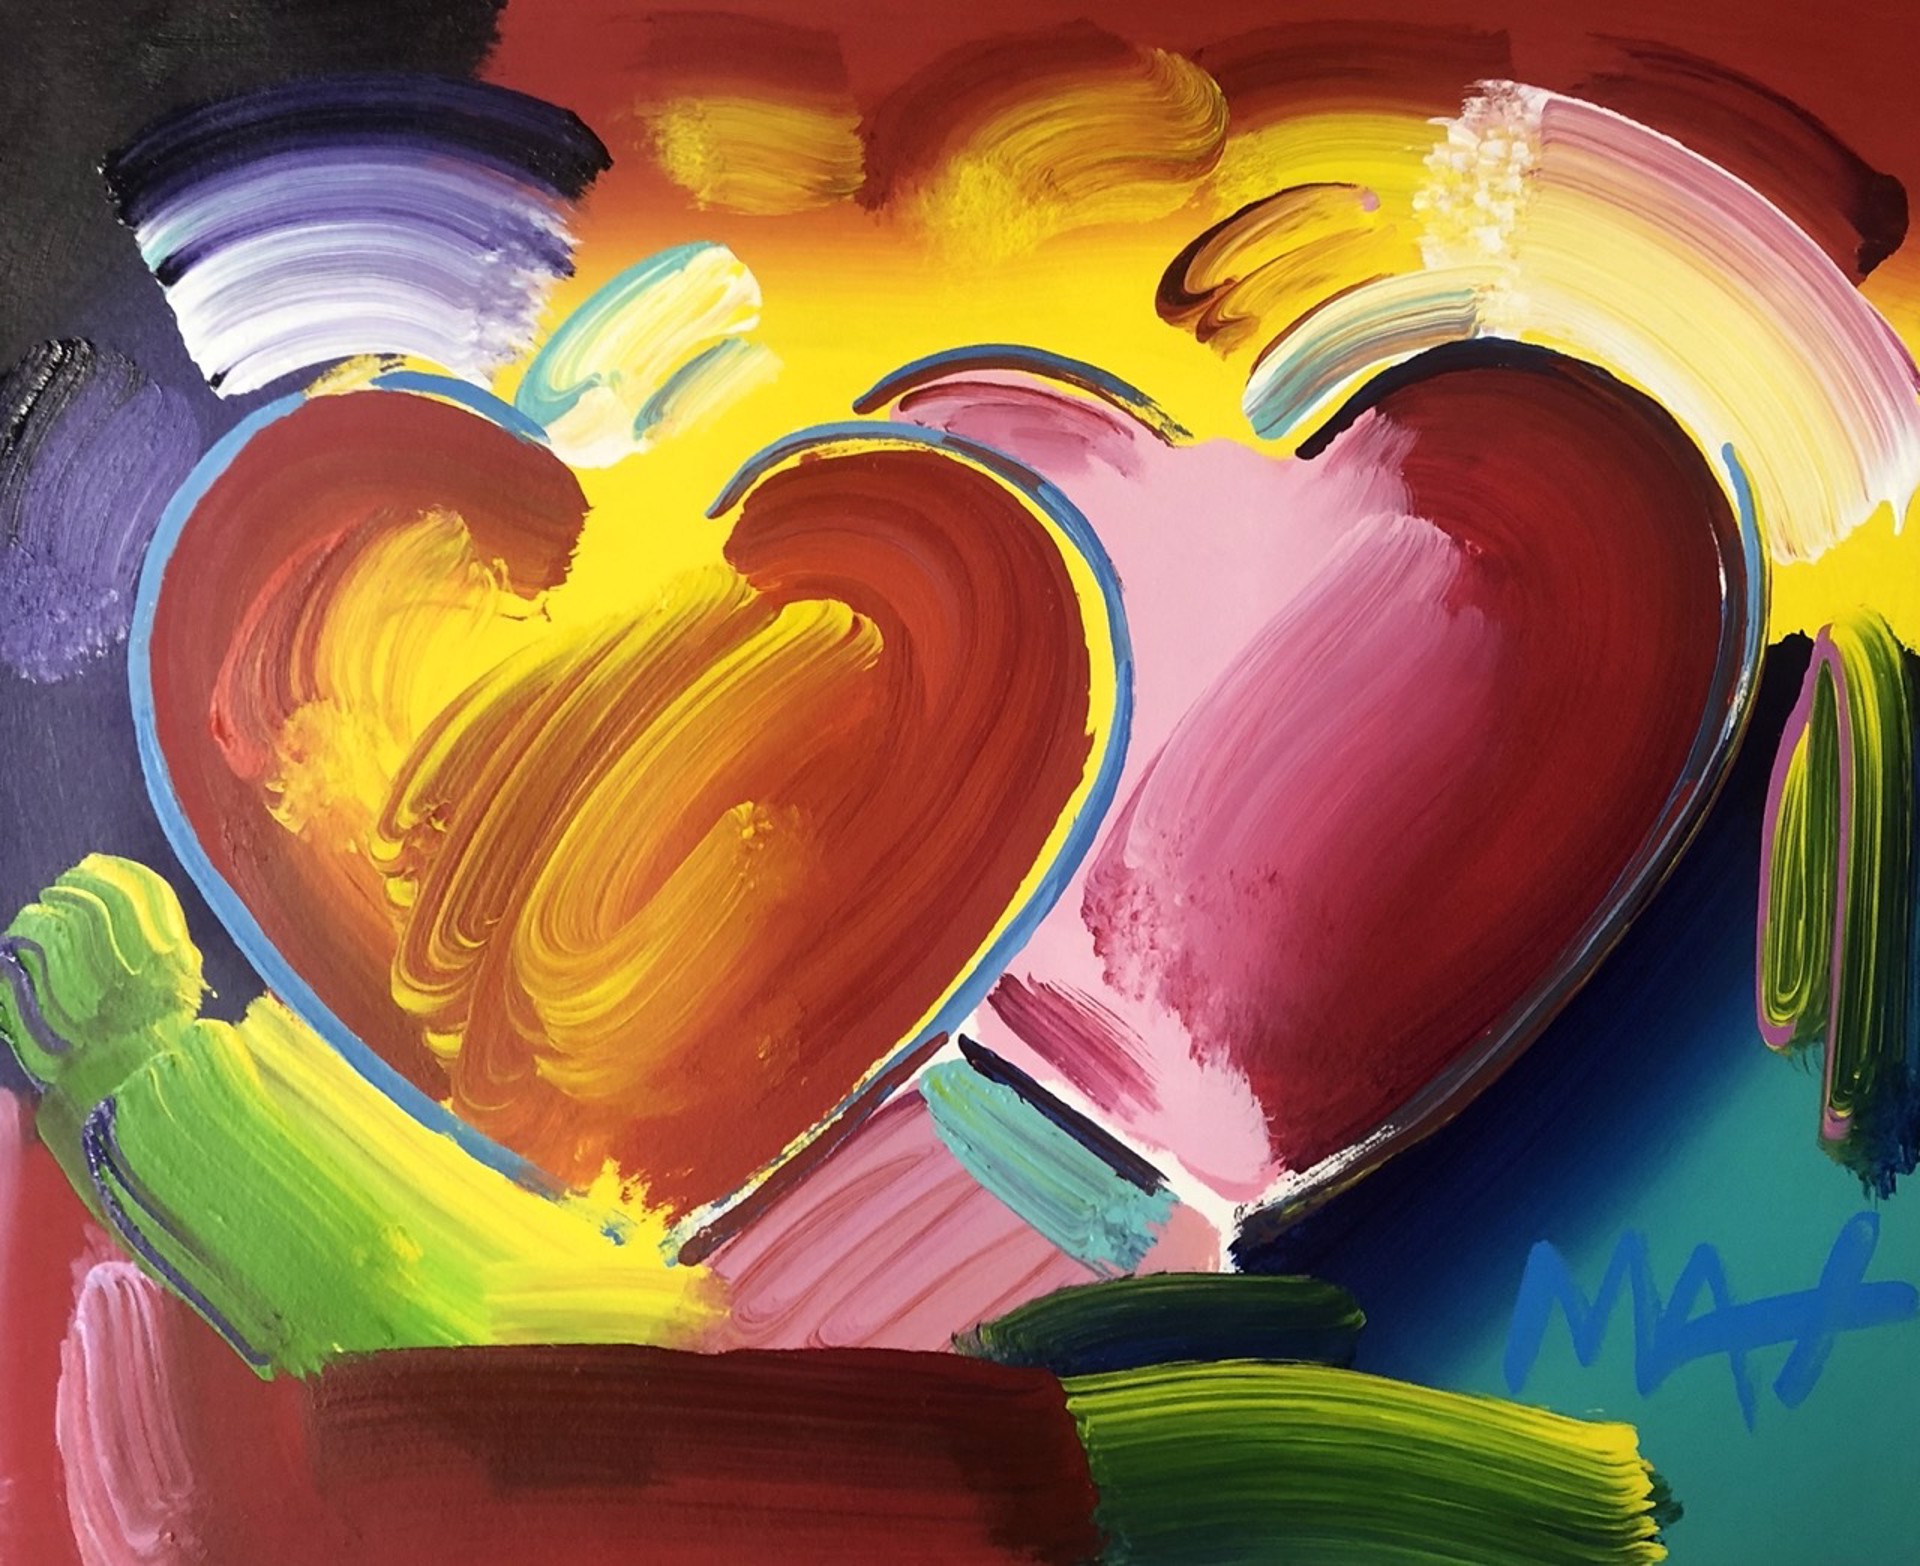 Two Hearts by Peter Max